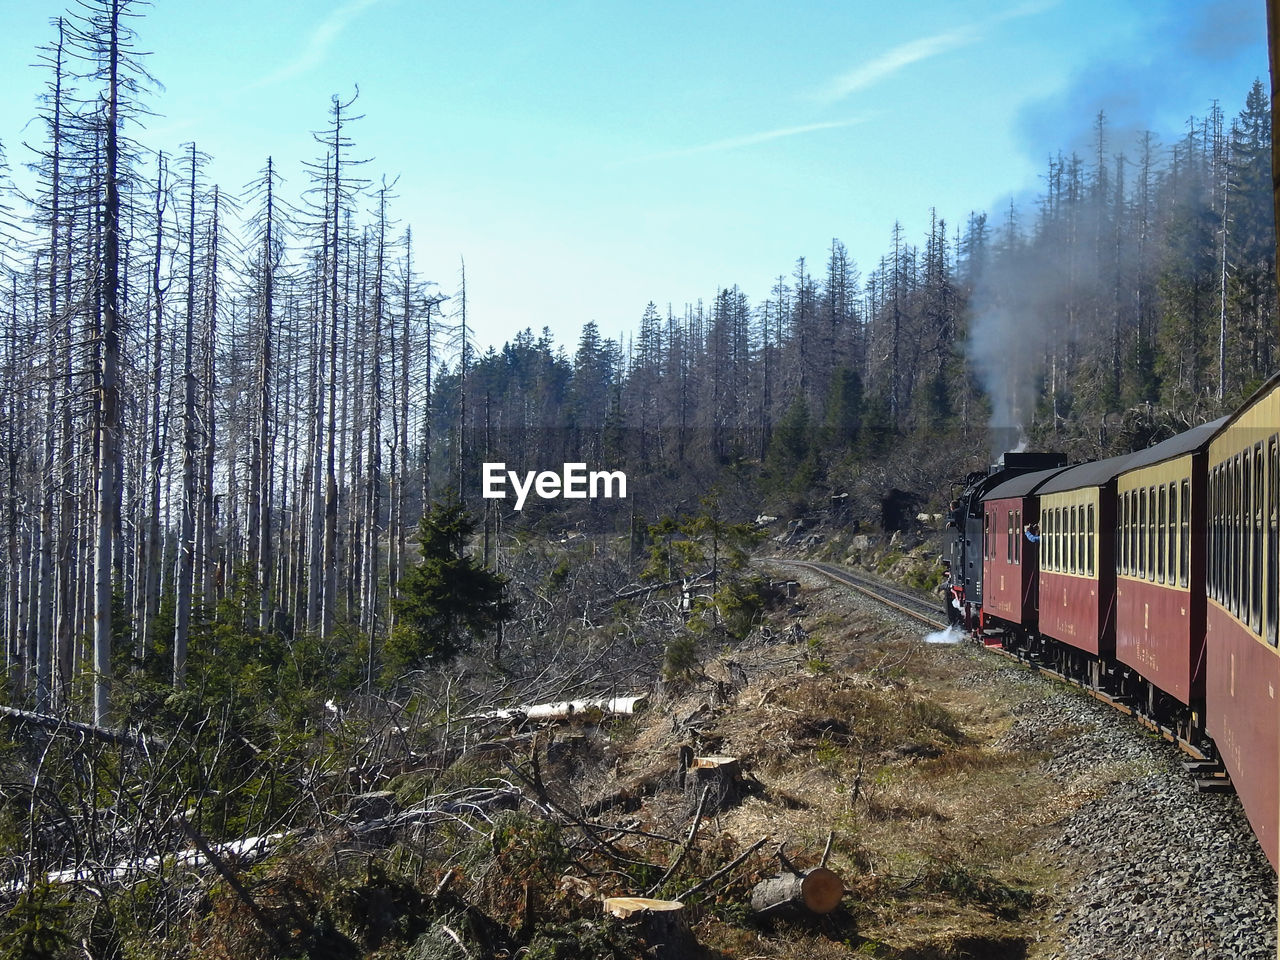 Train on railroad track in forest against sky